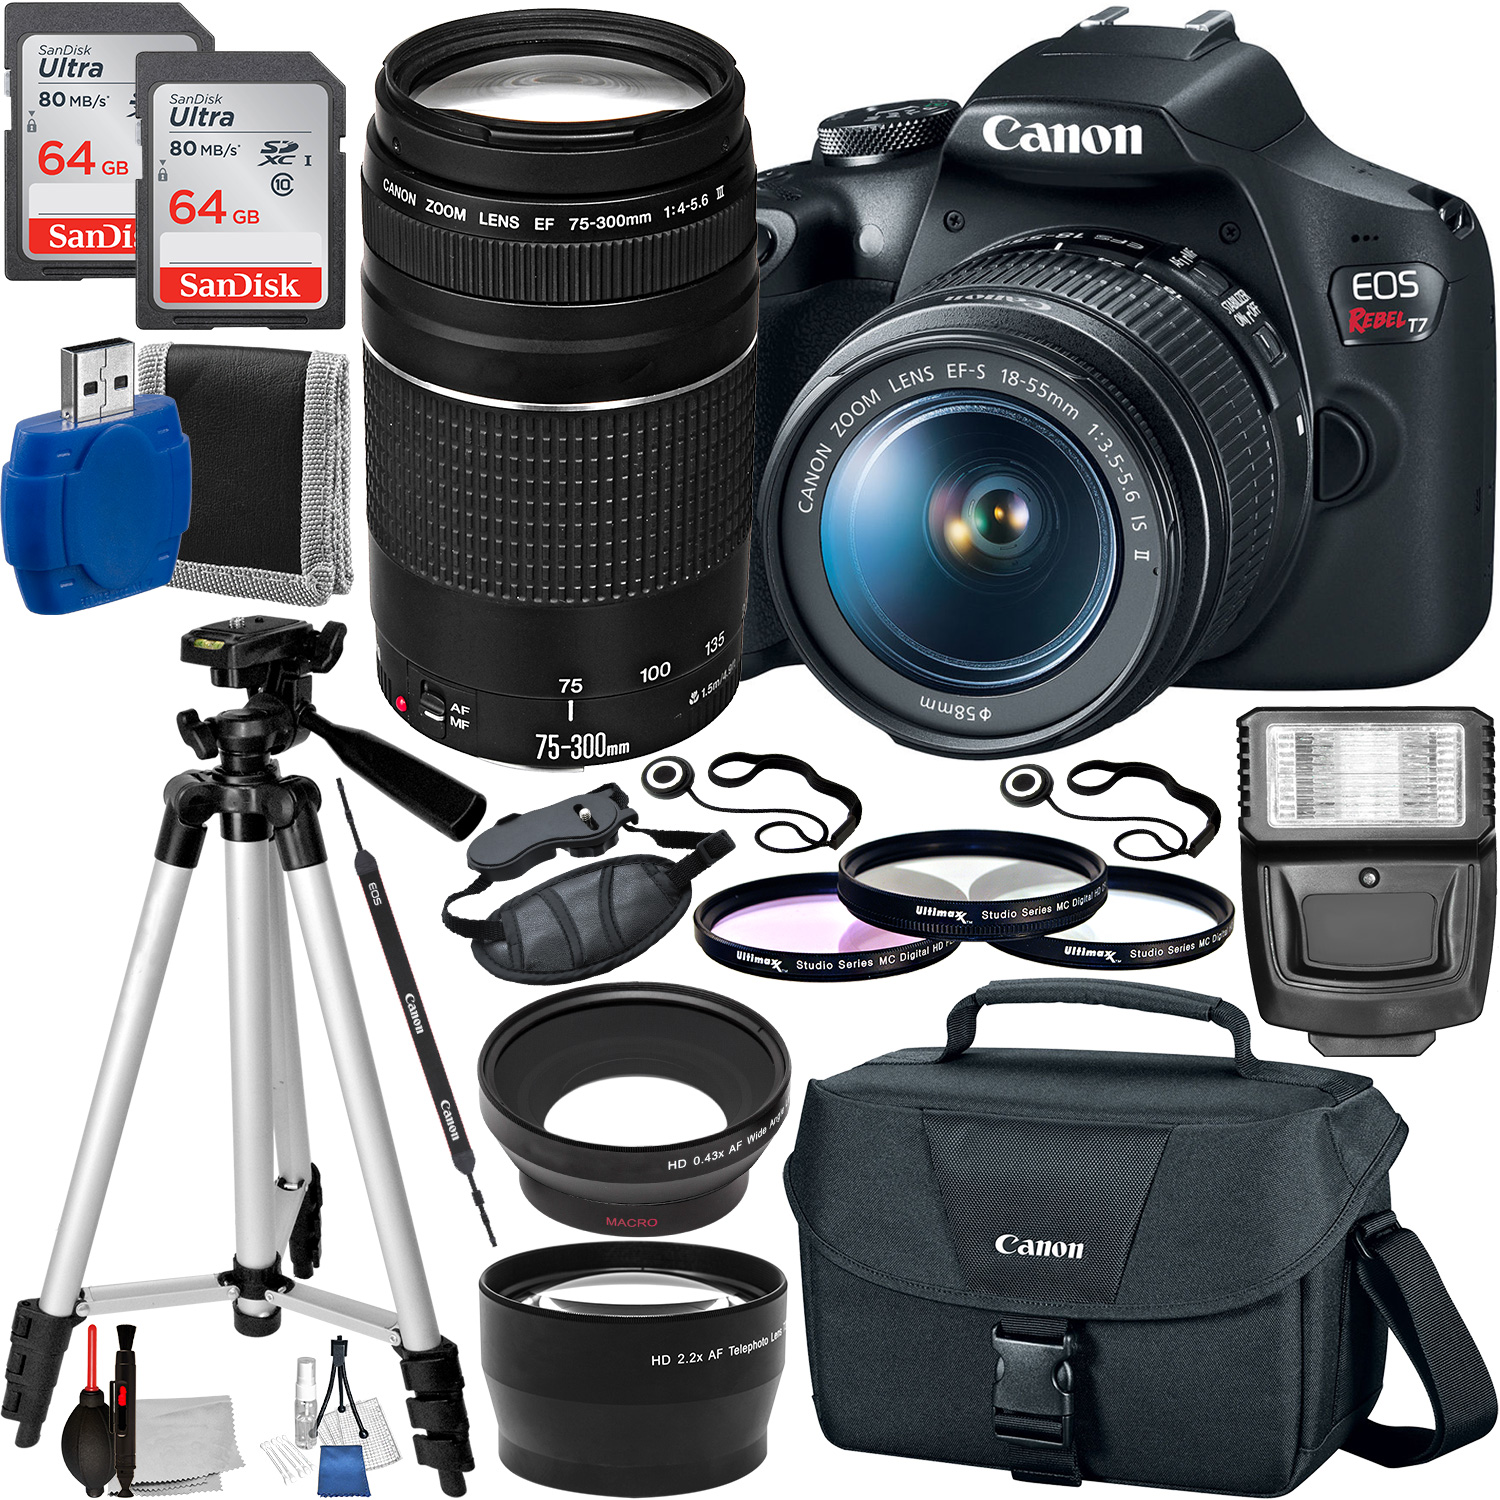 Canon EOS Rebel T7 DSLR Camera with 18-55mm and 75-300mm Lenses - 2727C021 Advanced Accessory Bundle